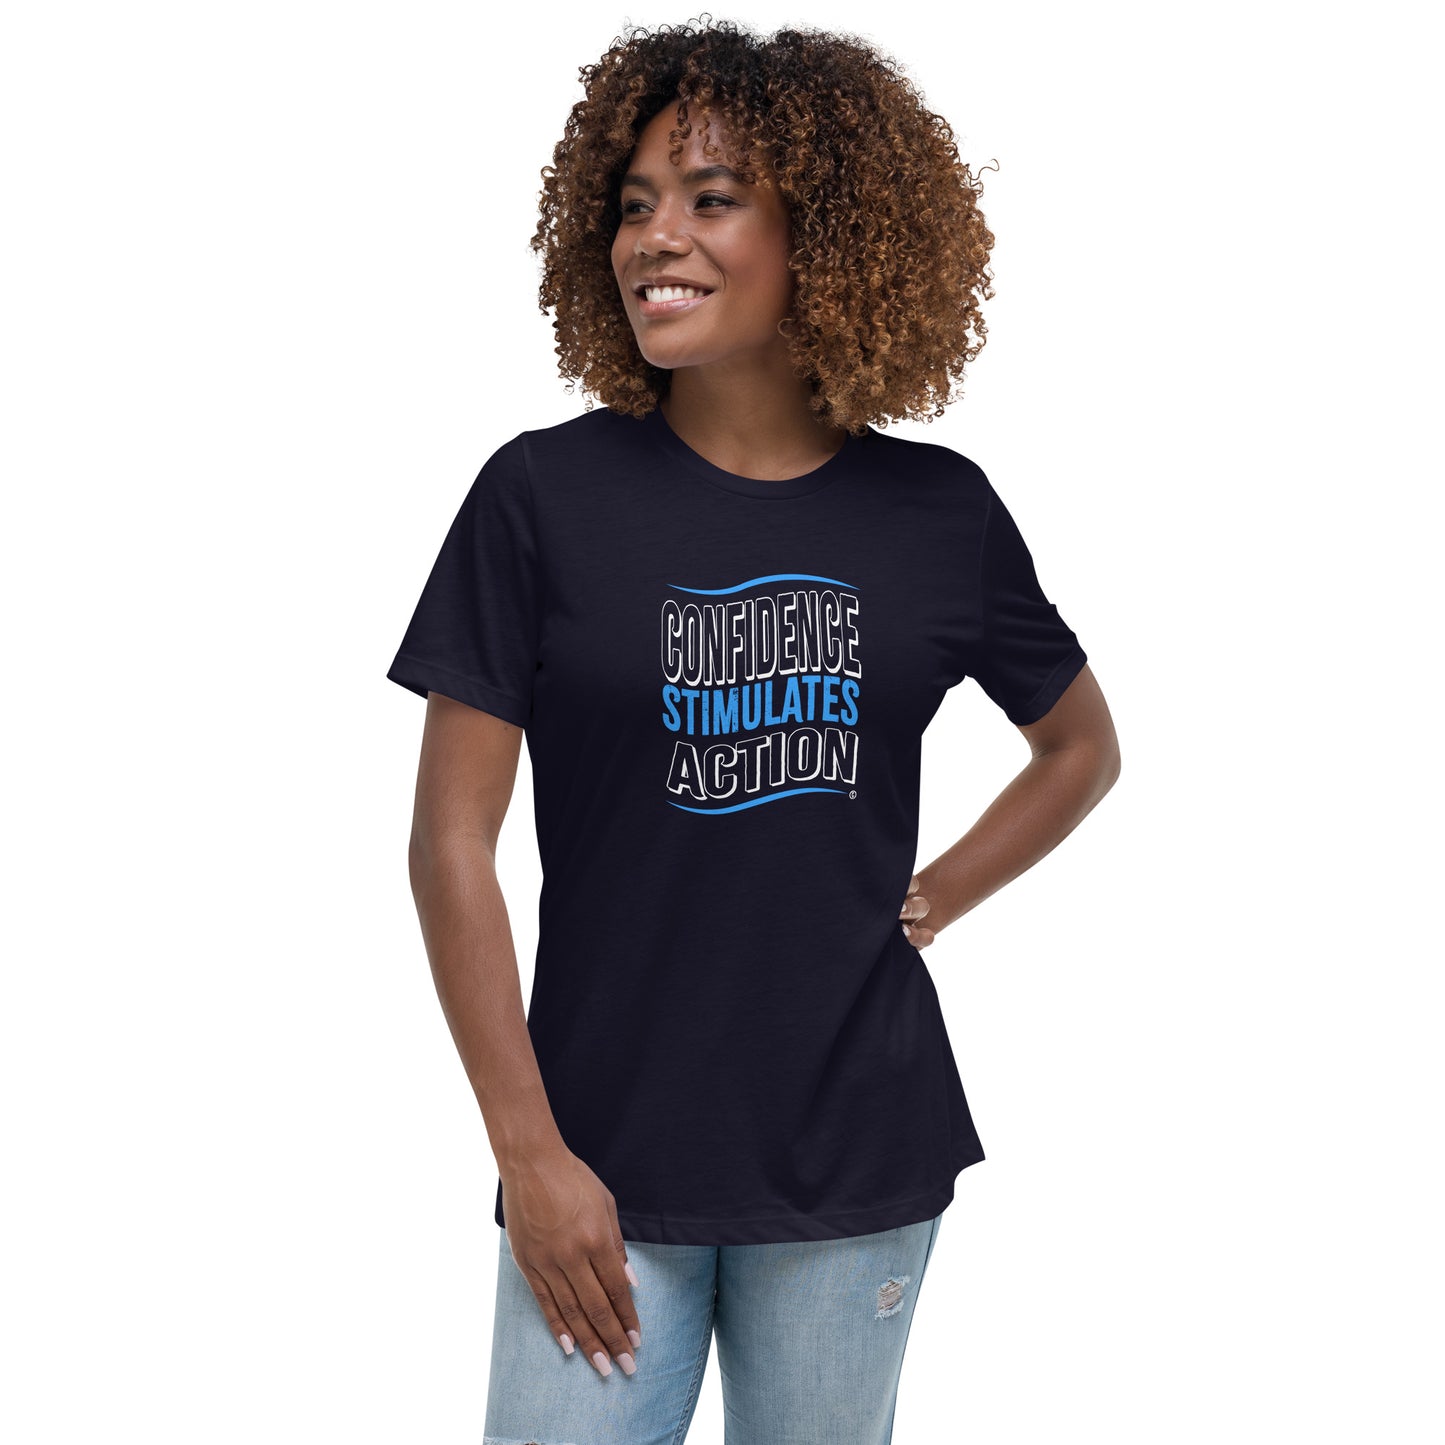 Confidence Stimulates Action Women's Tees